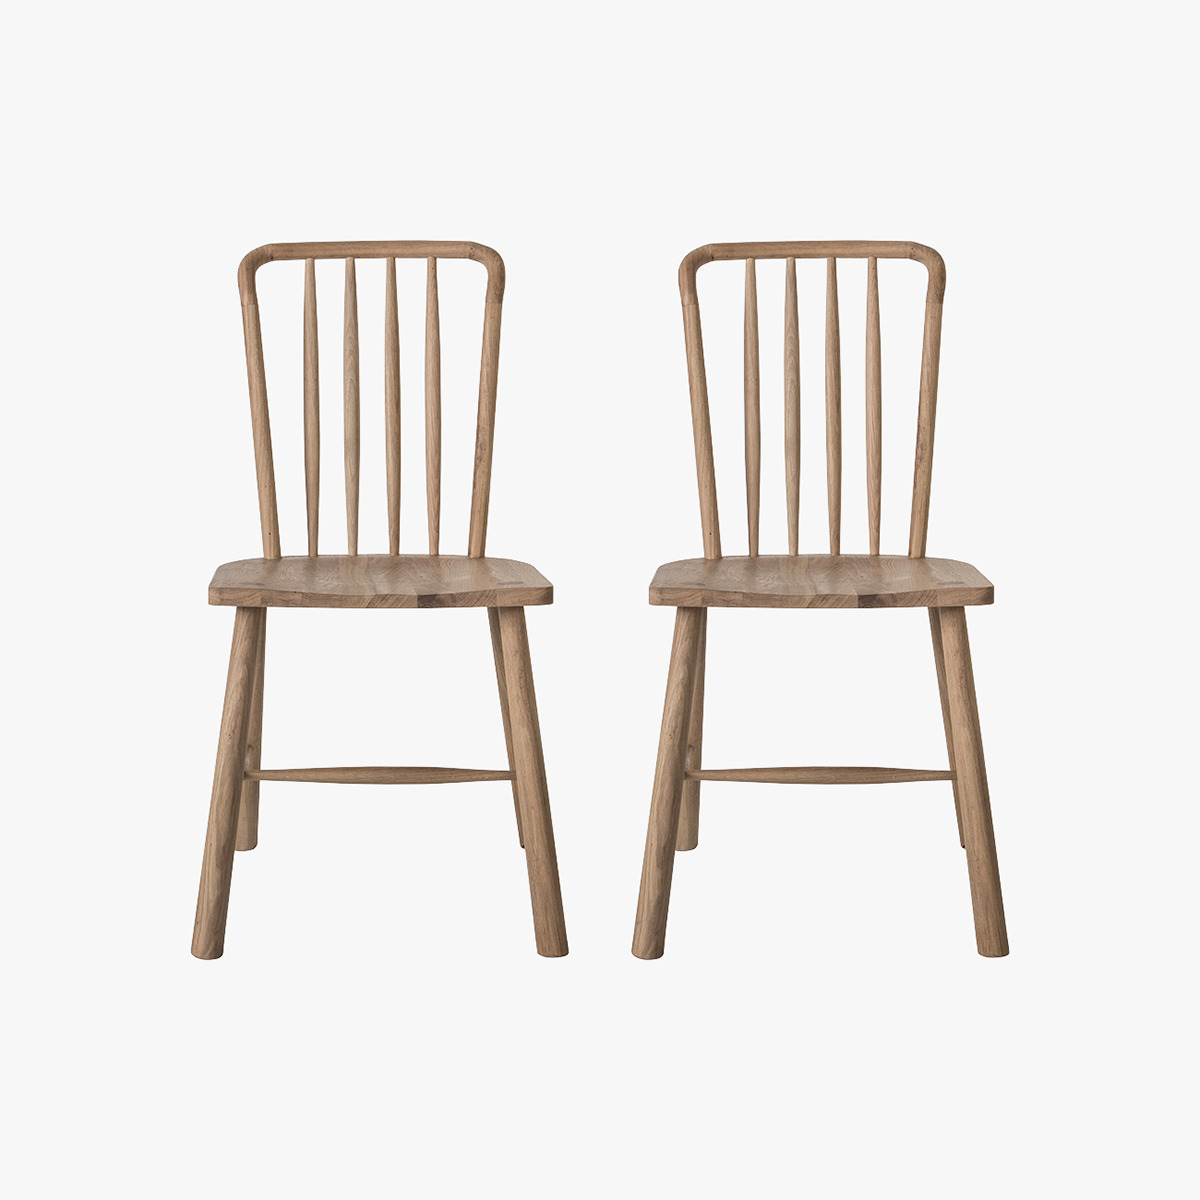 Rebecca Oak Dining Chair in Natural, Set of 2